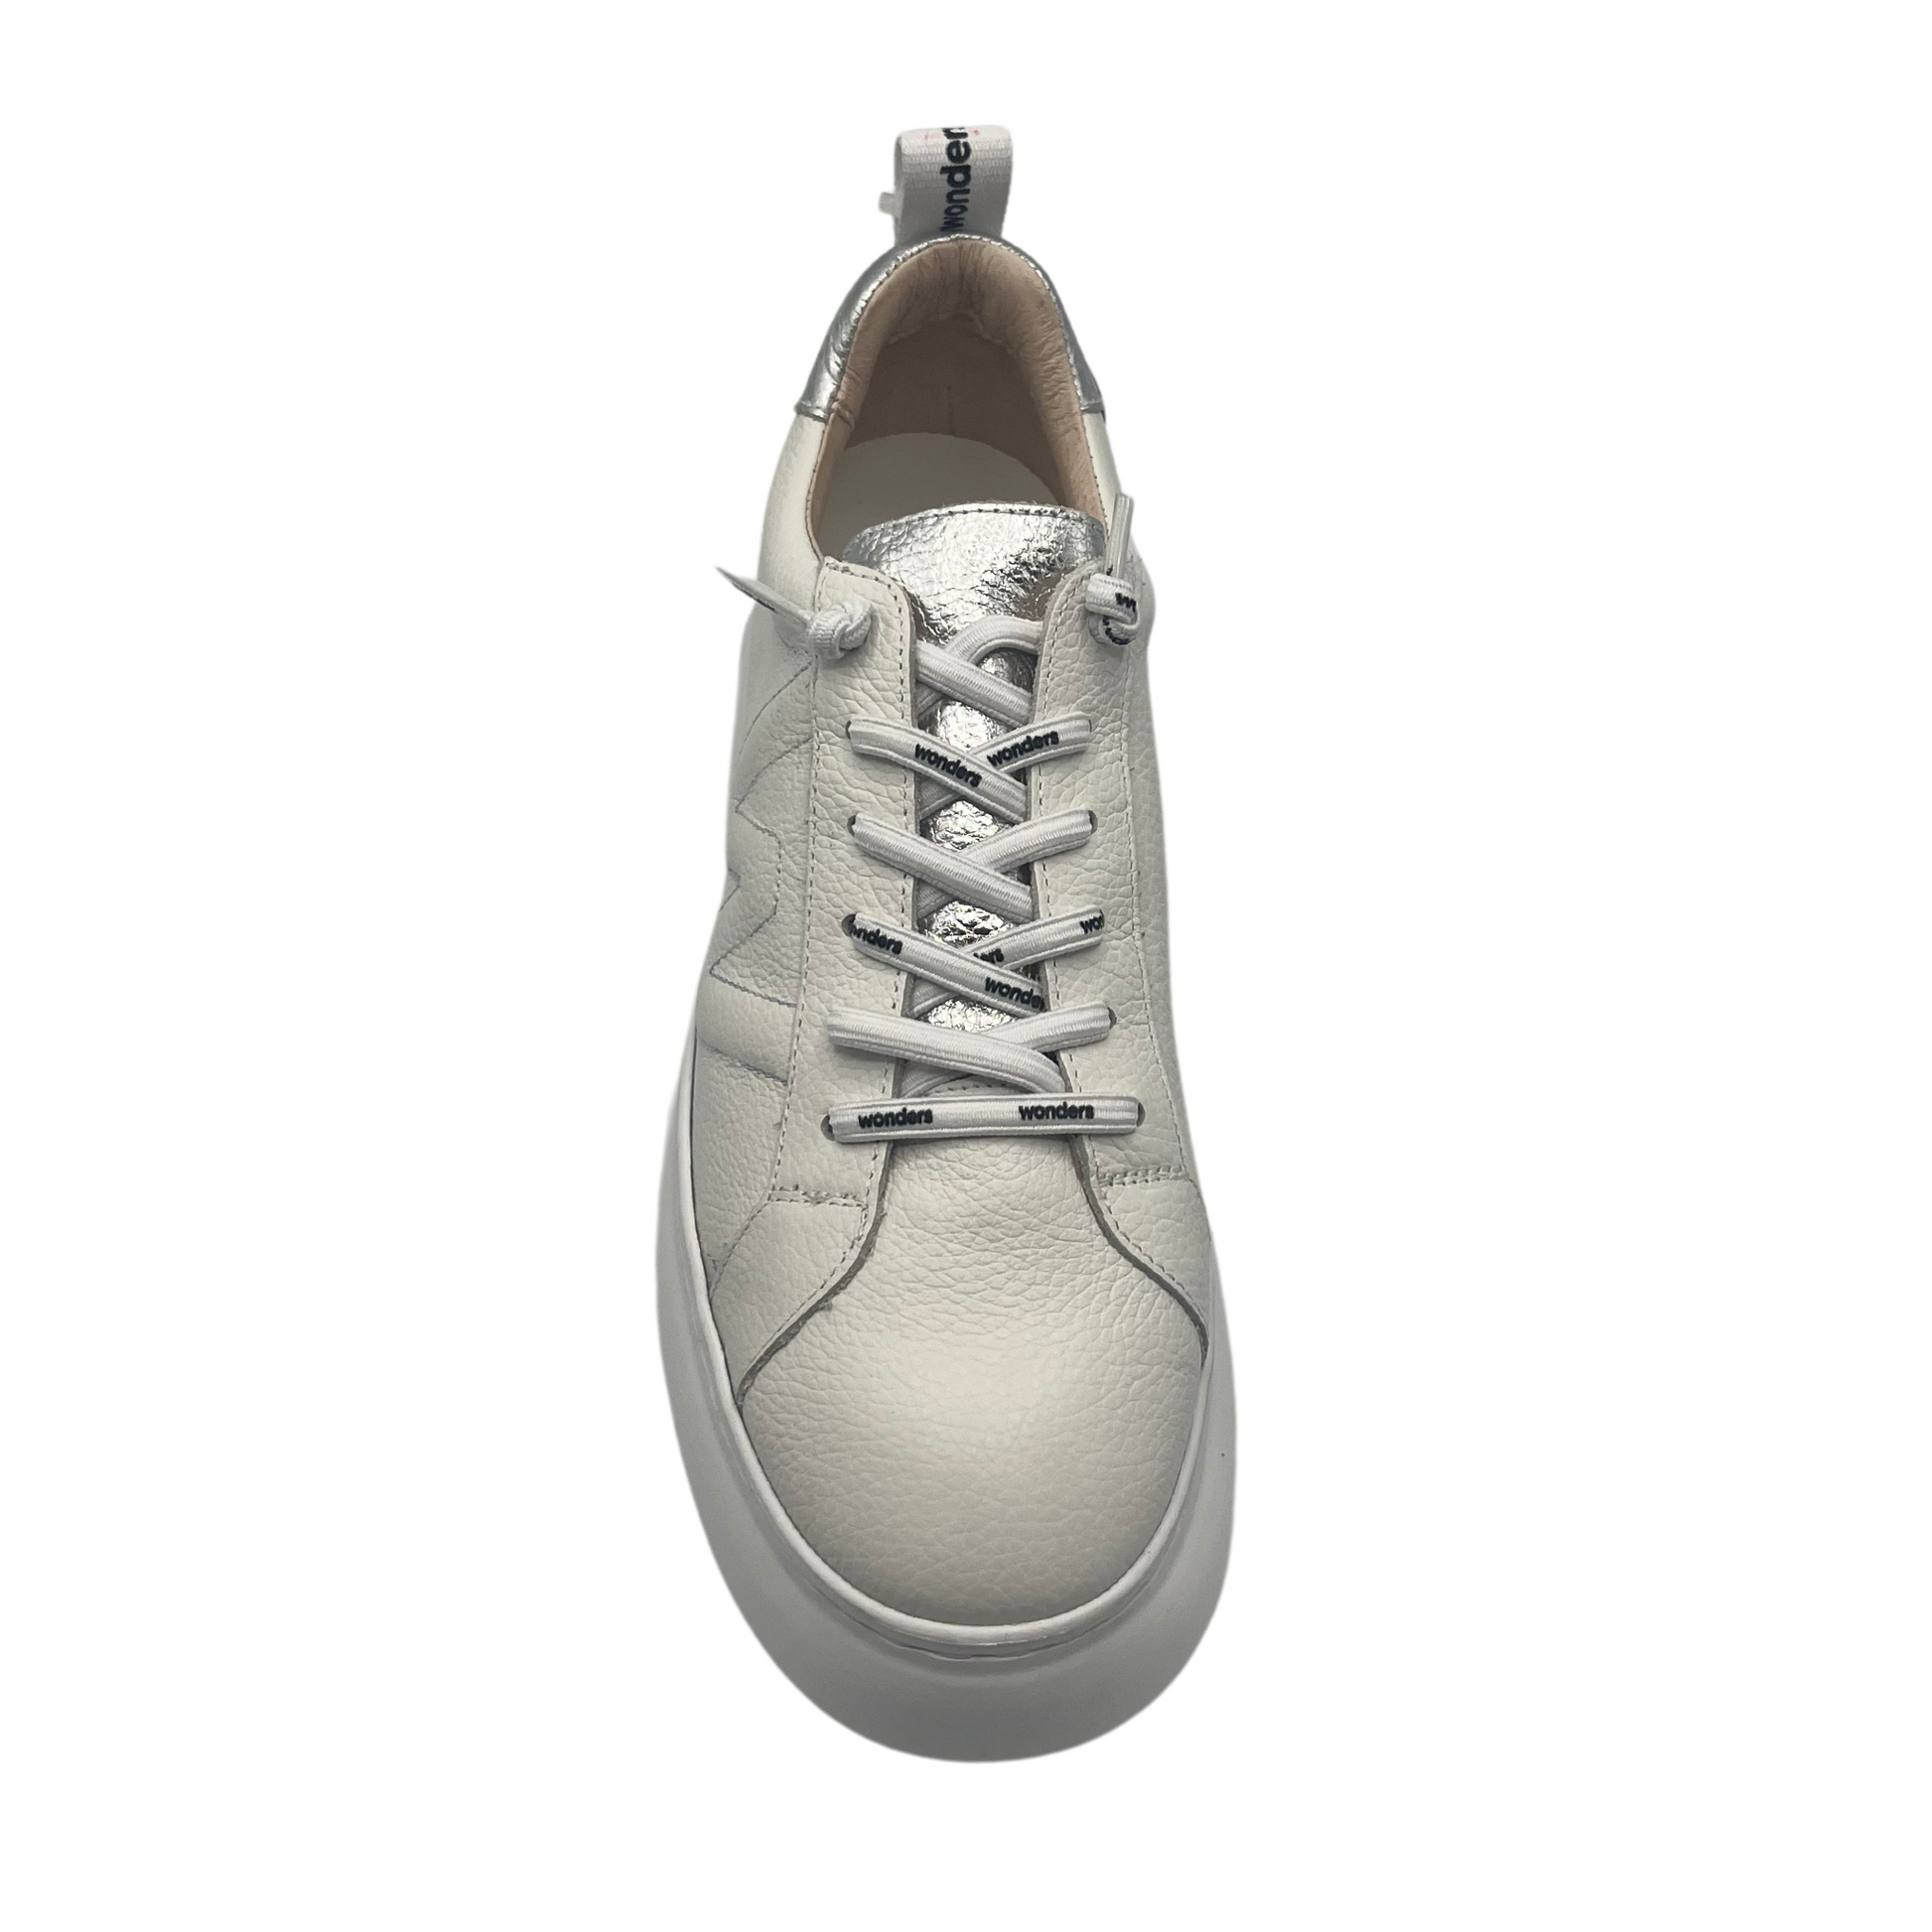 Top view of leather sneaker with white platform sole